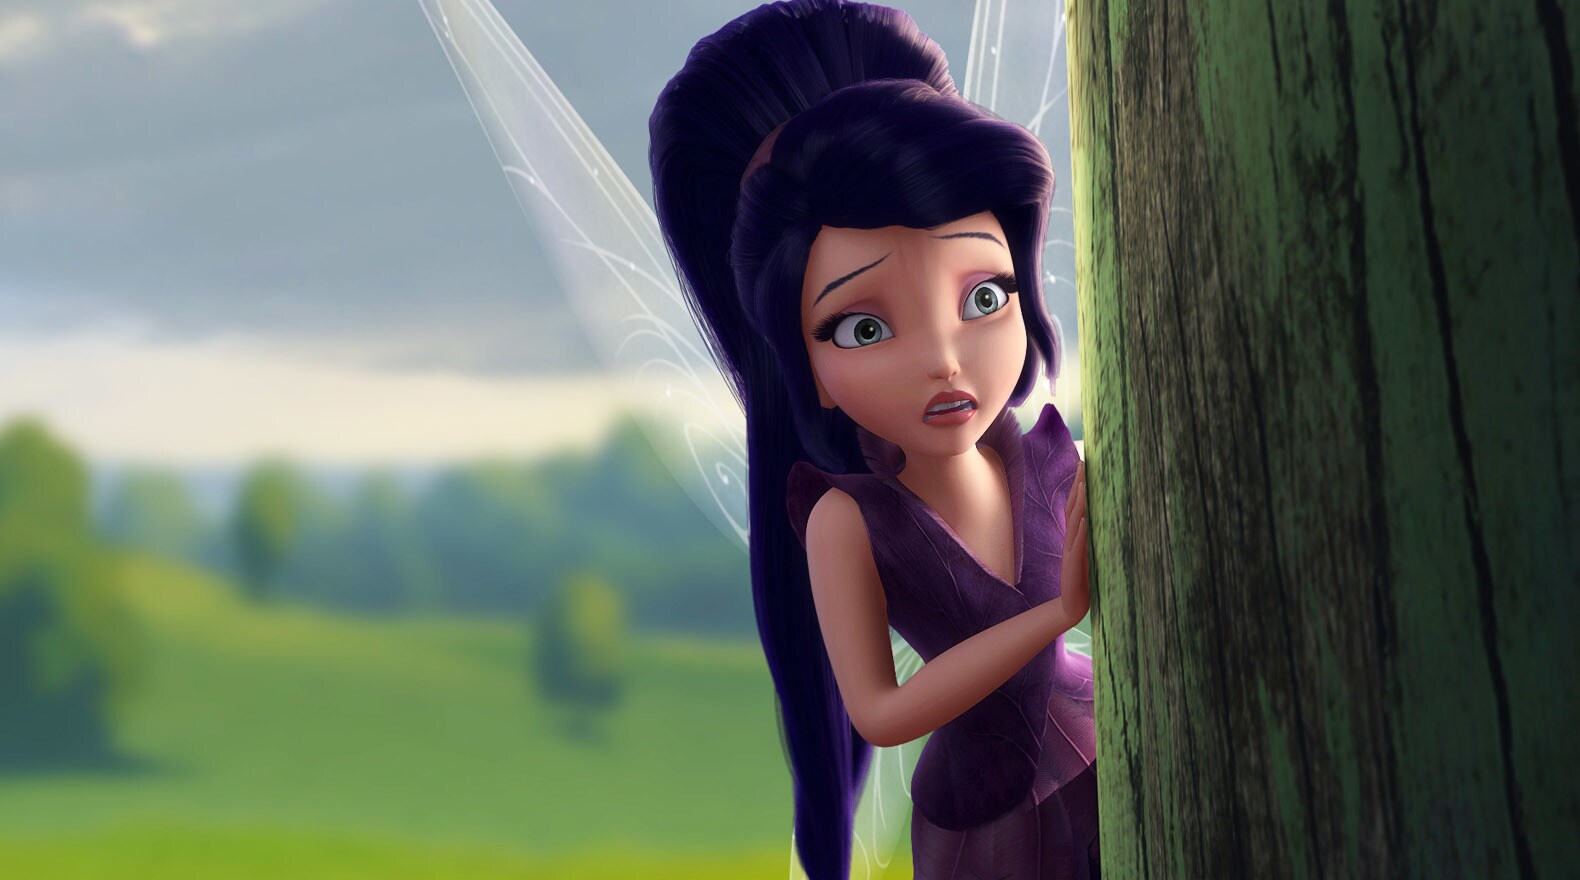 This Fast-flying Fairy worries where Tink’s journey will take her.